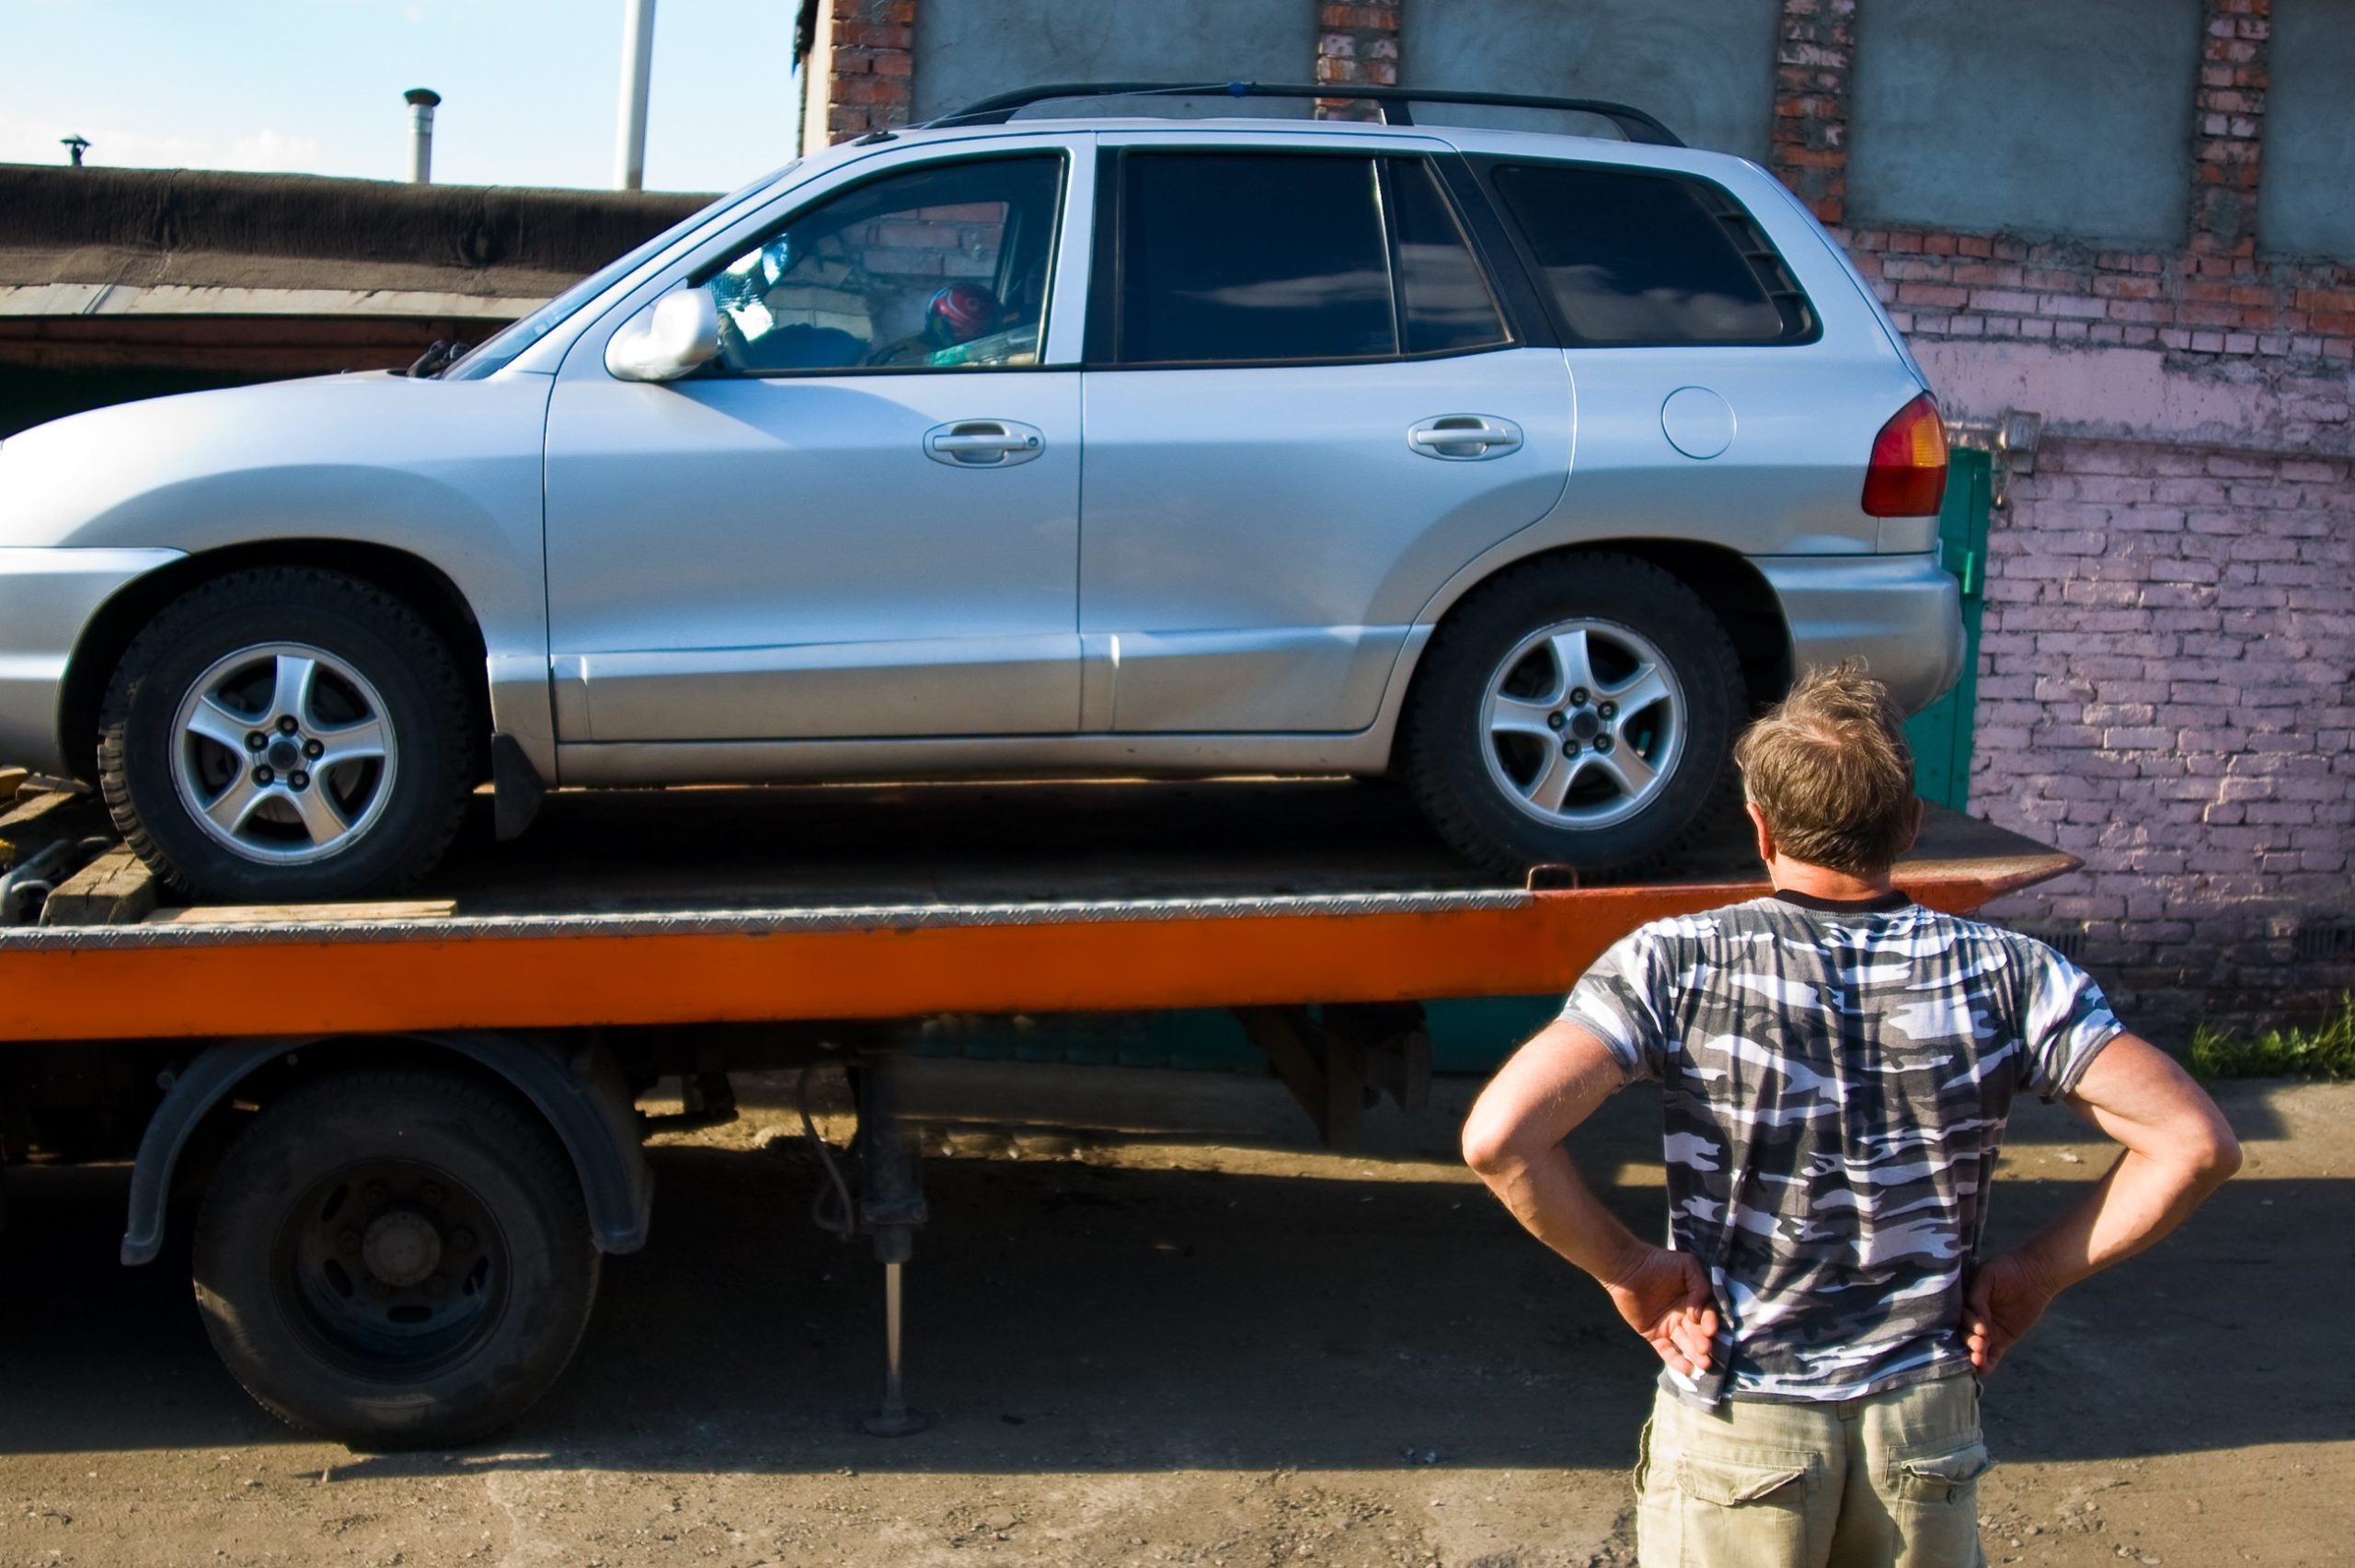 Does car insurance cover towing?